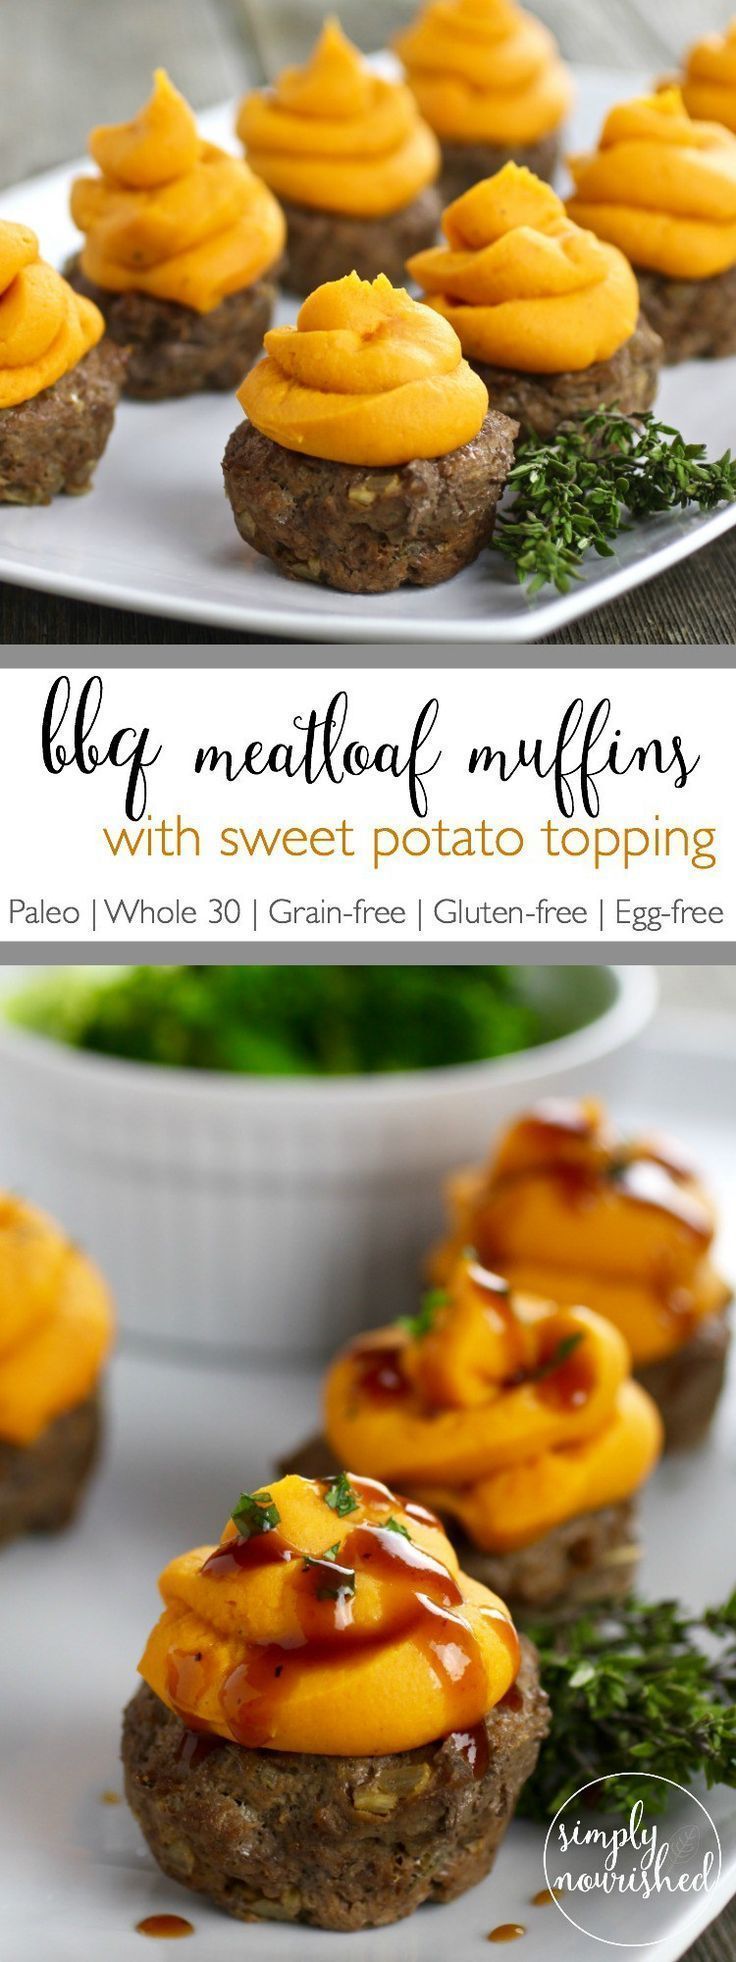 BBQ Meatloaf Muffins with Sweet Potato Topping |Paleo | Whole 30 | Egg-free